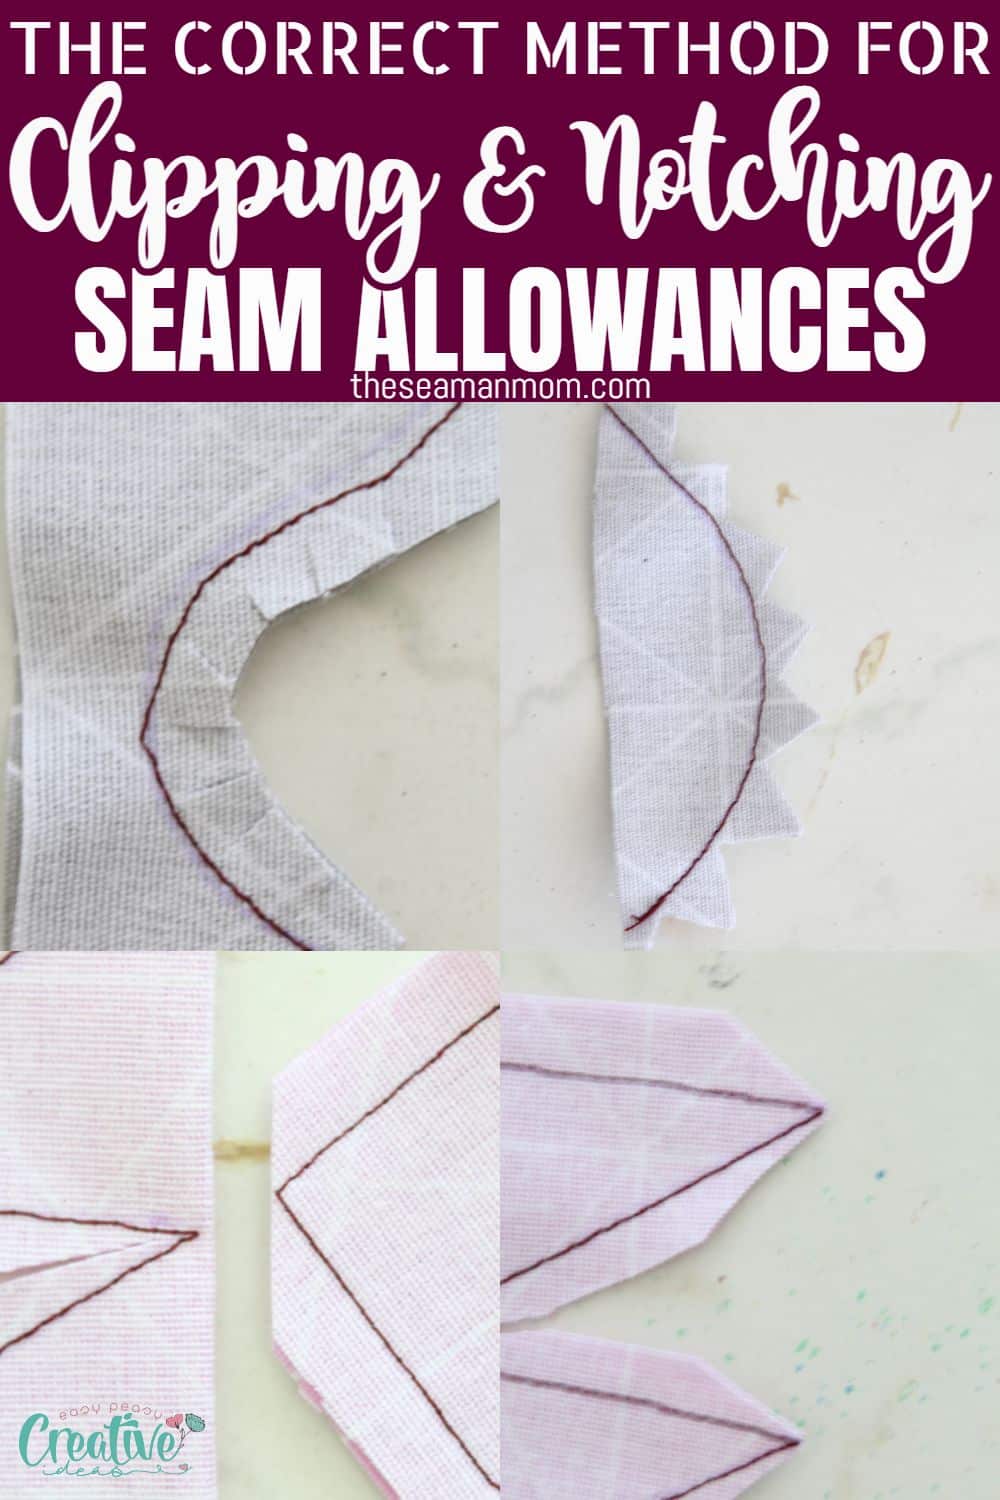 Clipping and notching seam allowances correctly